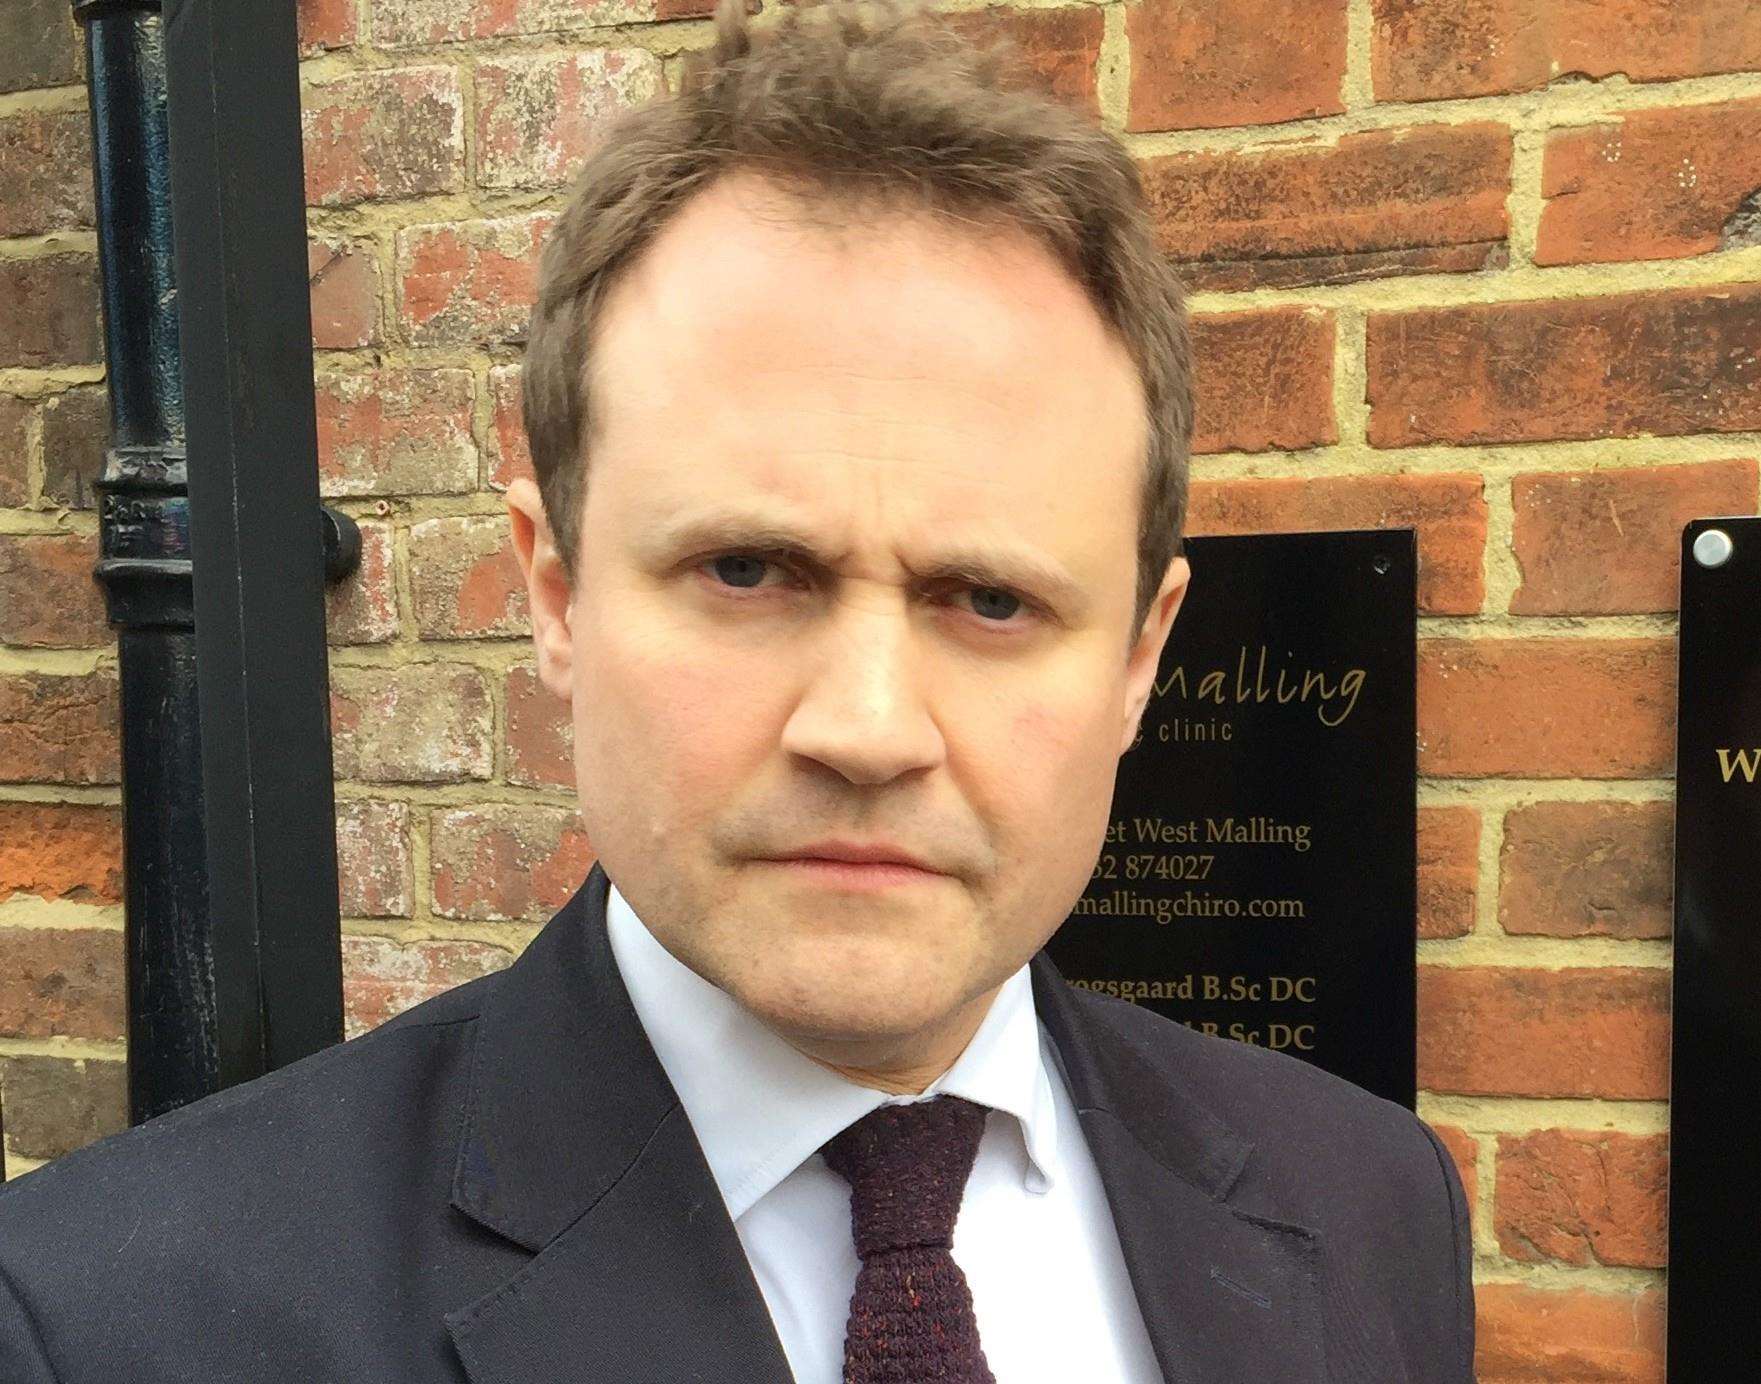 MP Tom Tugendhat spoke out in parliament today